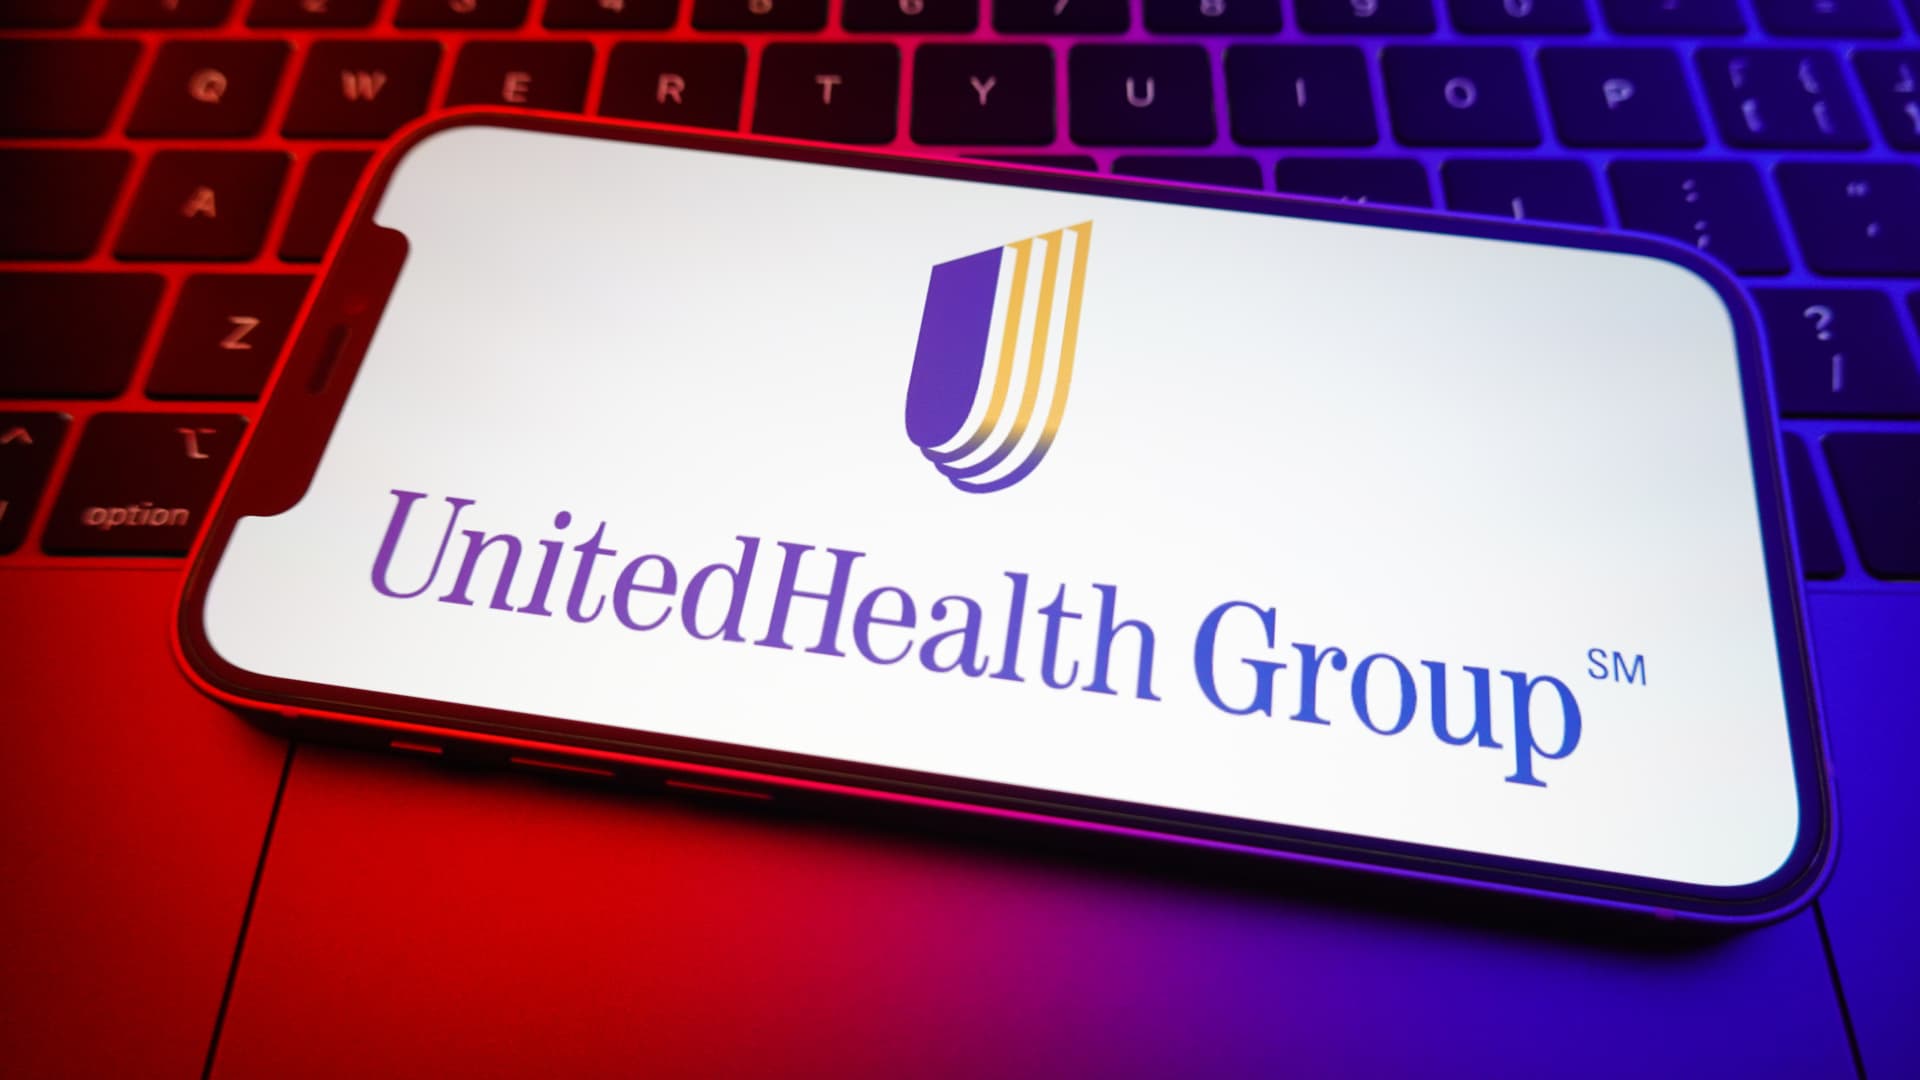 UnitedHealth Group has paid more than  billion to providers following cyberattack